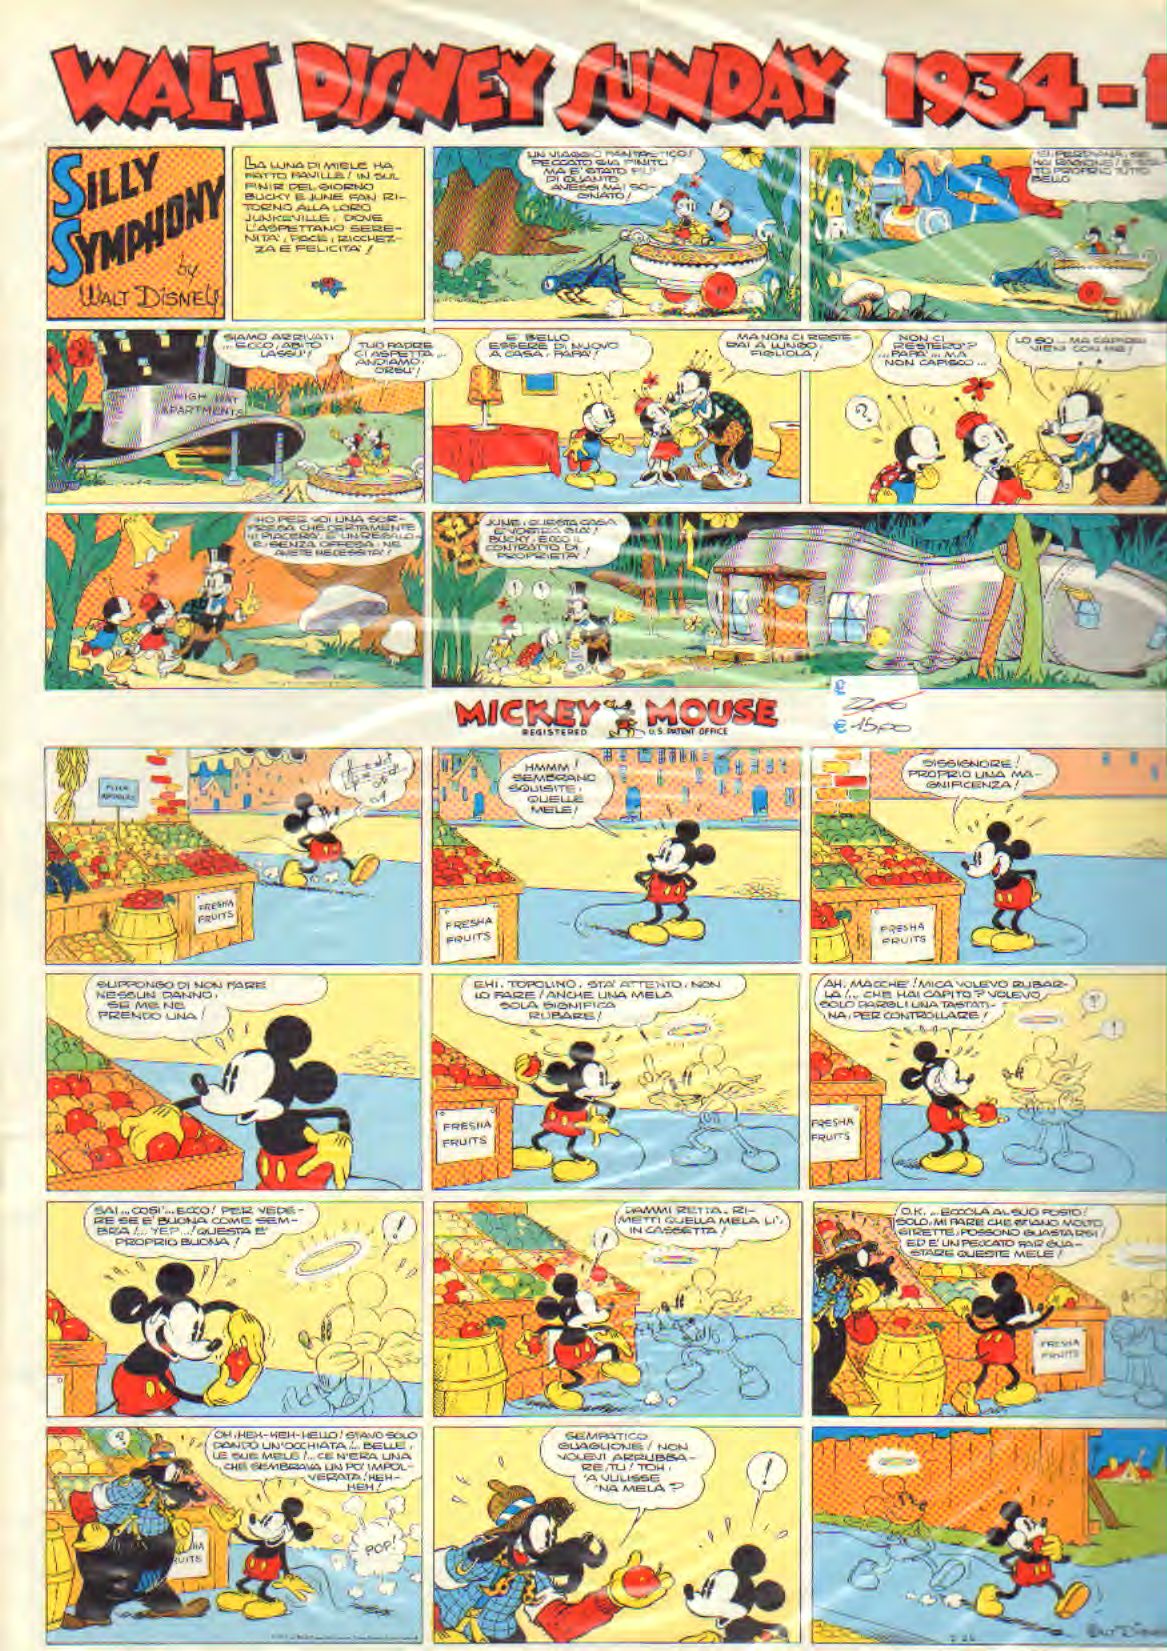 Silly Symphonies E Mickey Mouse (1934/1) 32 P